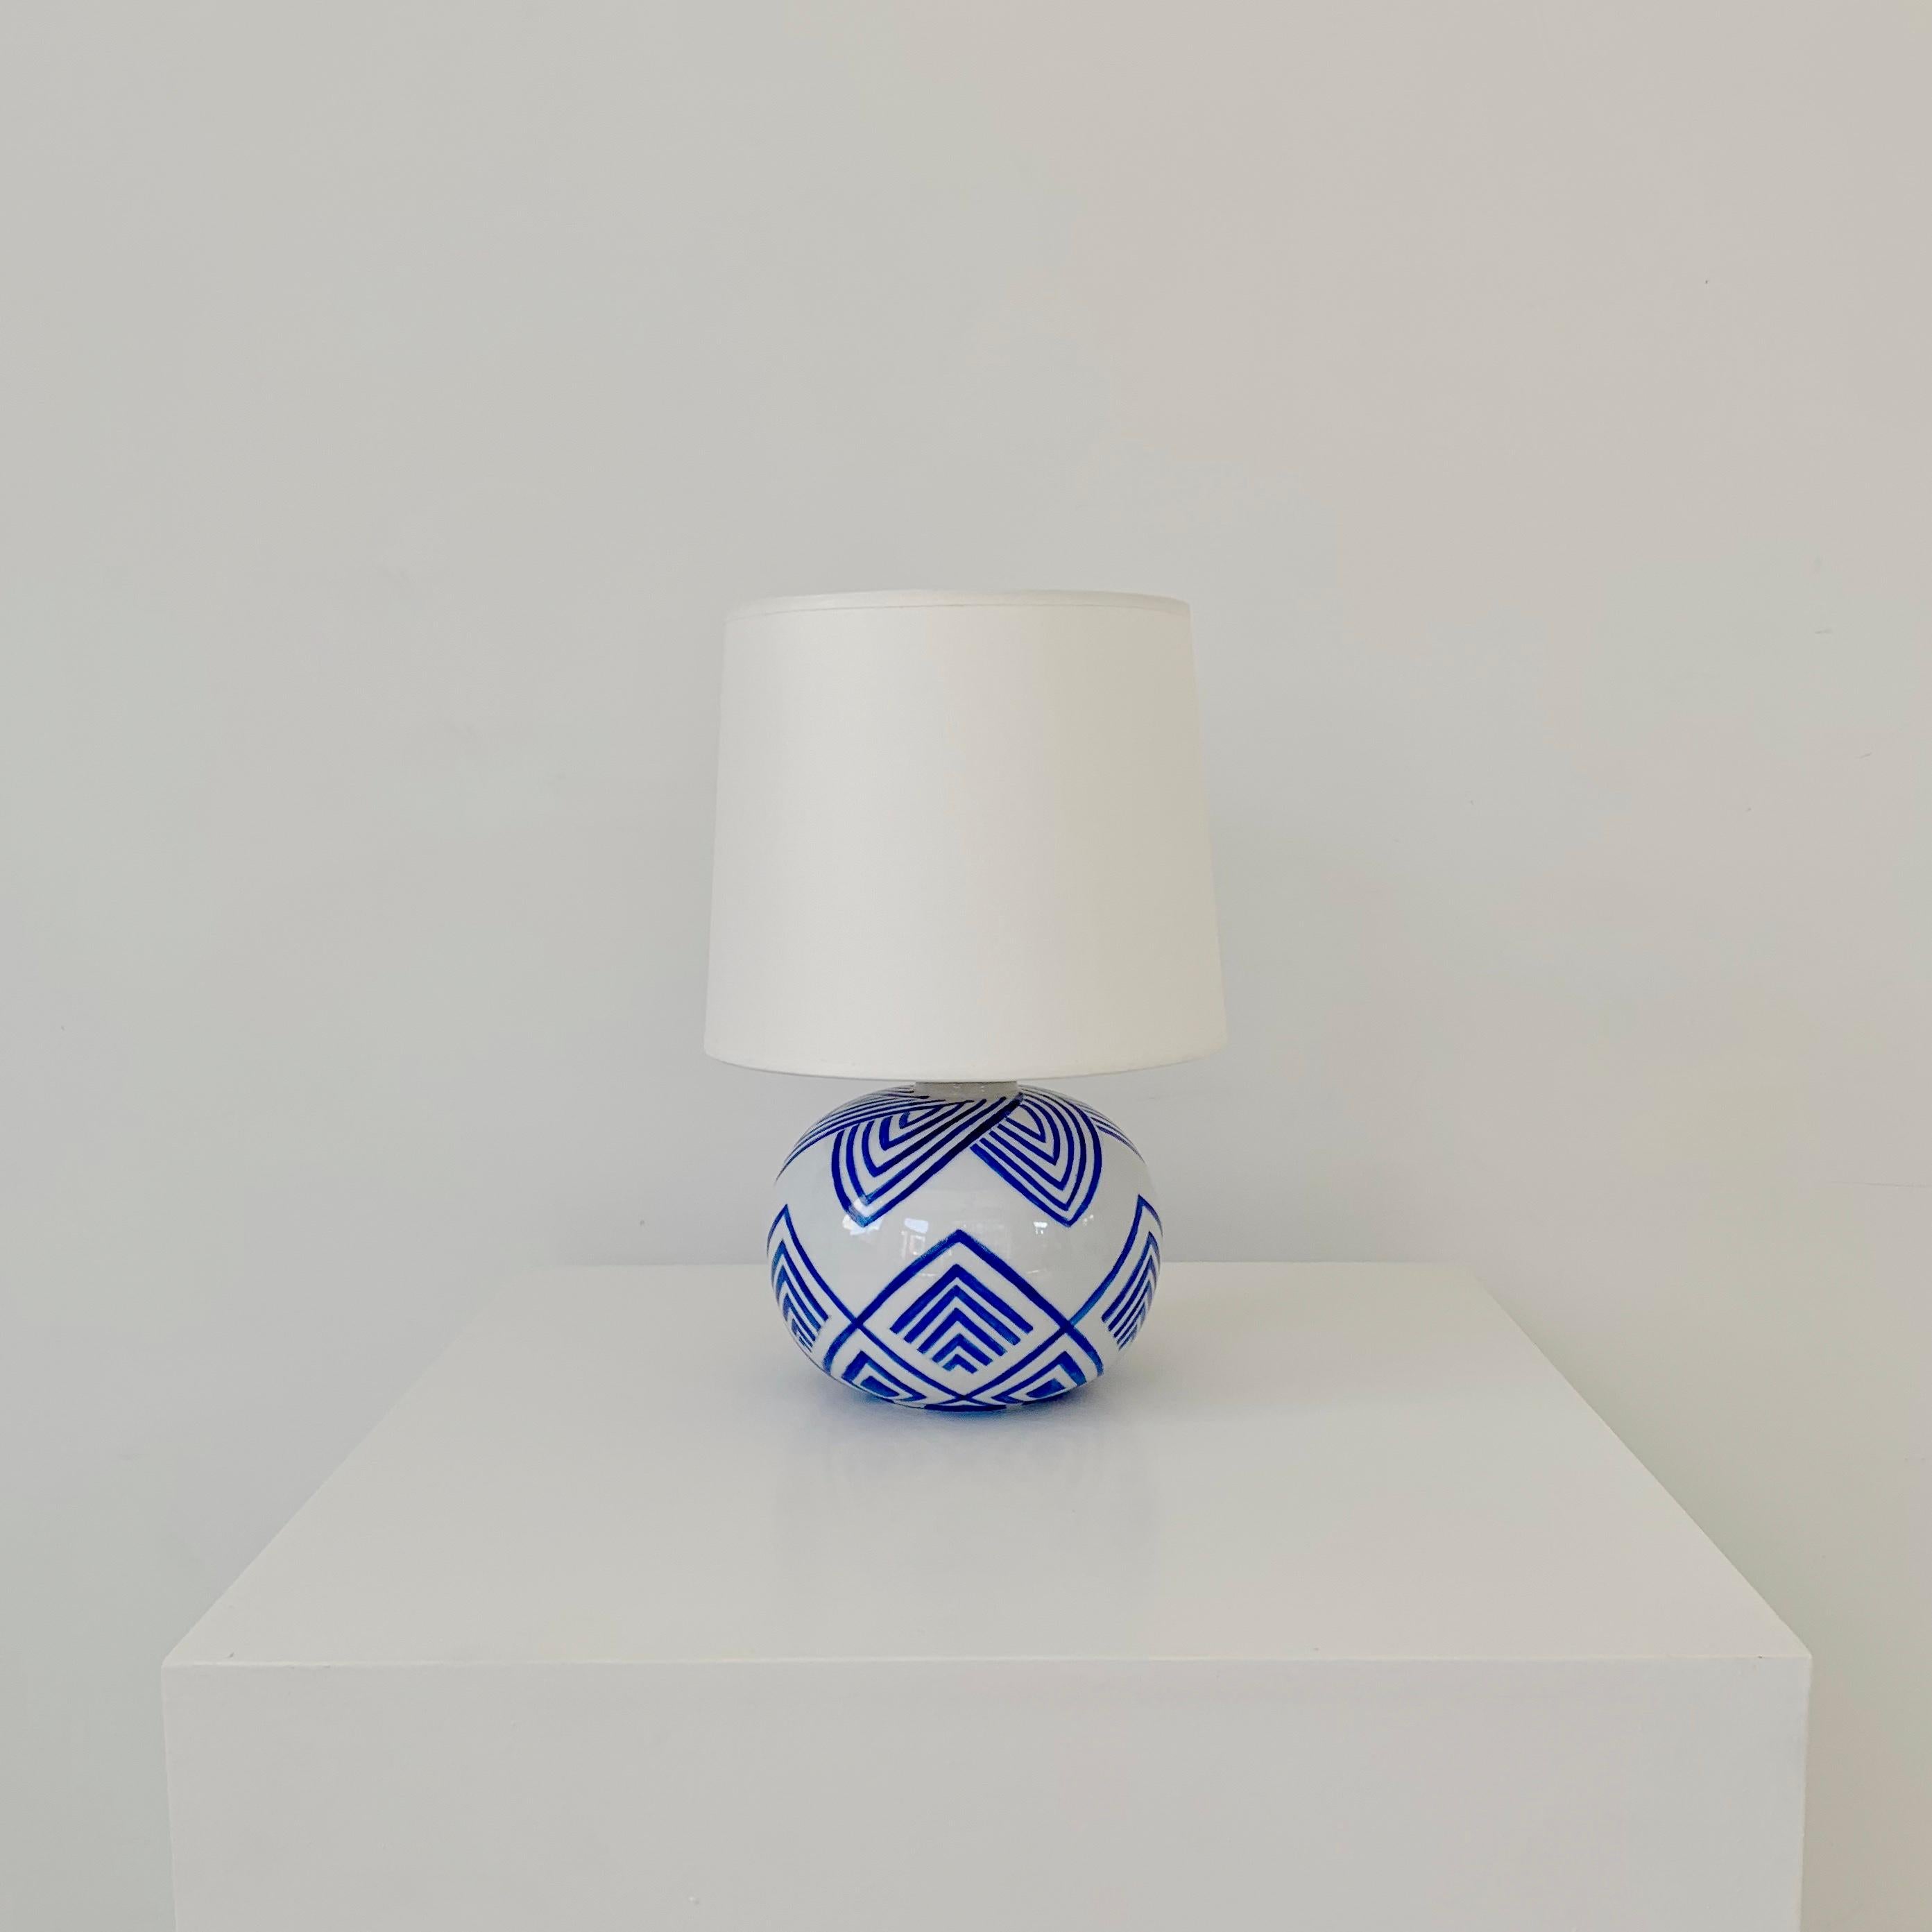 Mid-Century White and Blue Decorative Table Lamp, 1929, France. 6